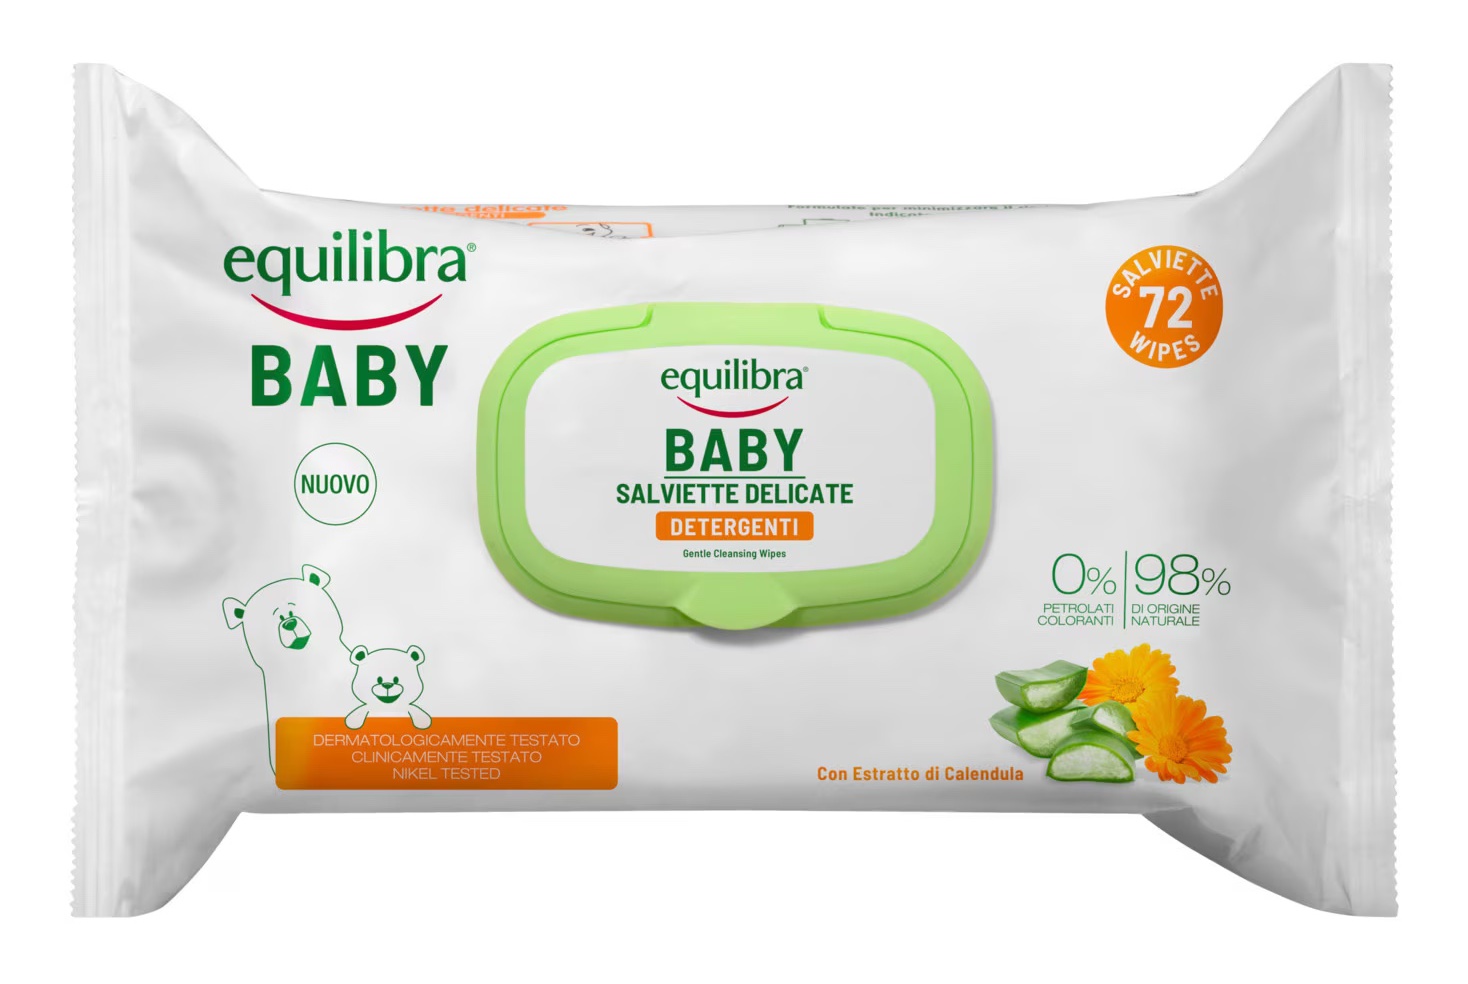 Equilibra Baby Gentle Cleansing Wipes